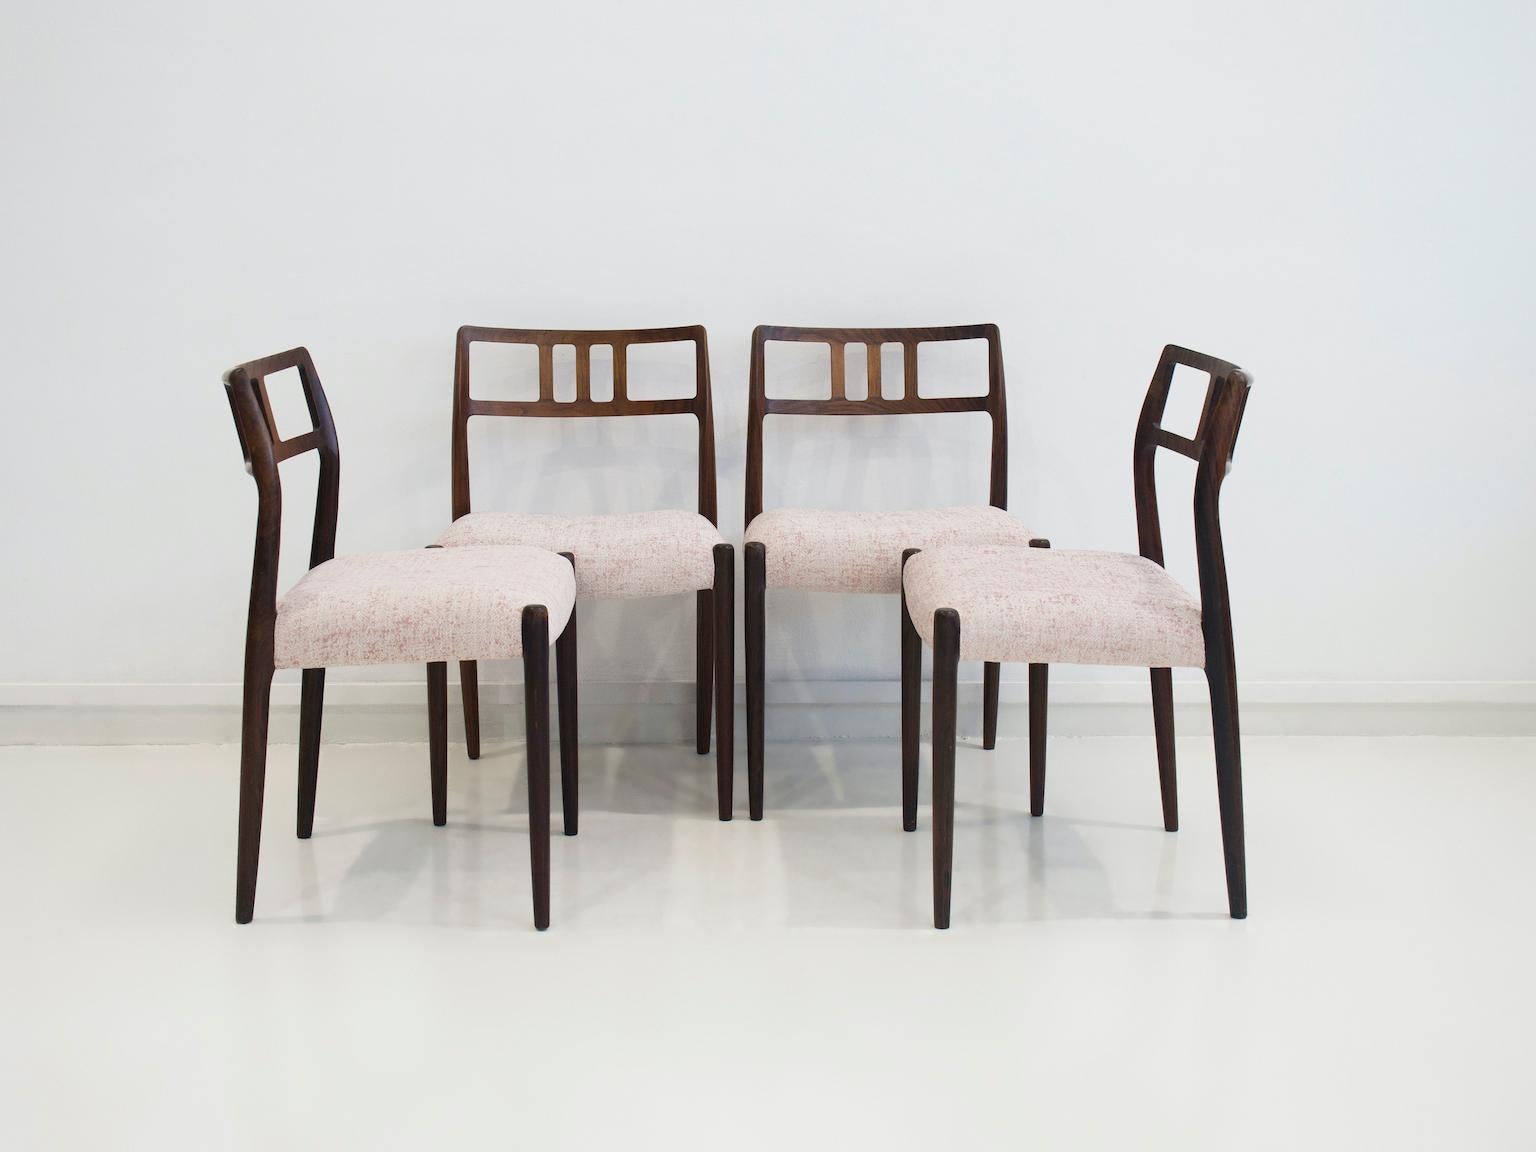 Set of four dining chairs designed by Niels Otto Møller, model 79. Manufactured by J.L. Møbler in Denmark. Frame made of hardwood, seat reupholstered in light pink and white polyester fabric.